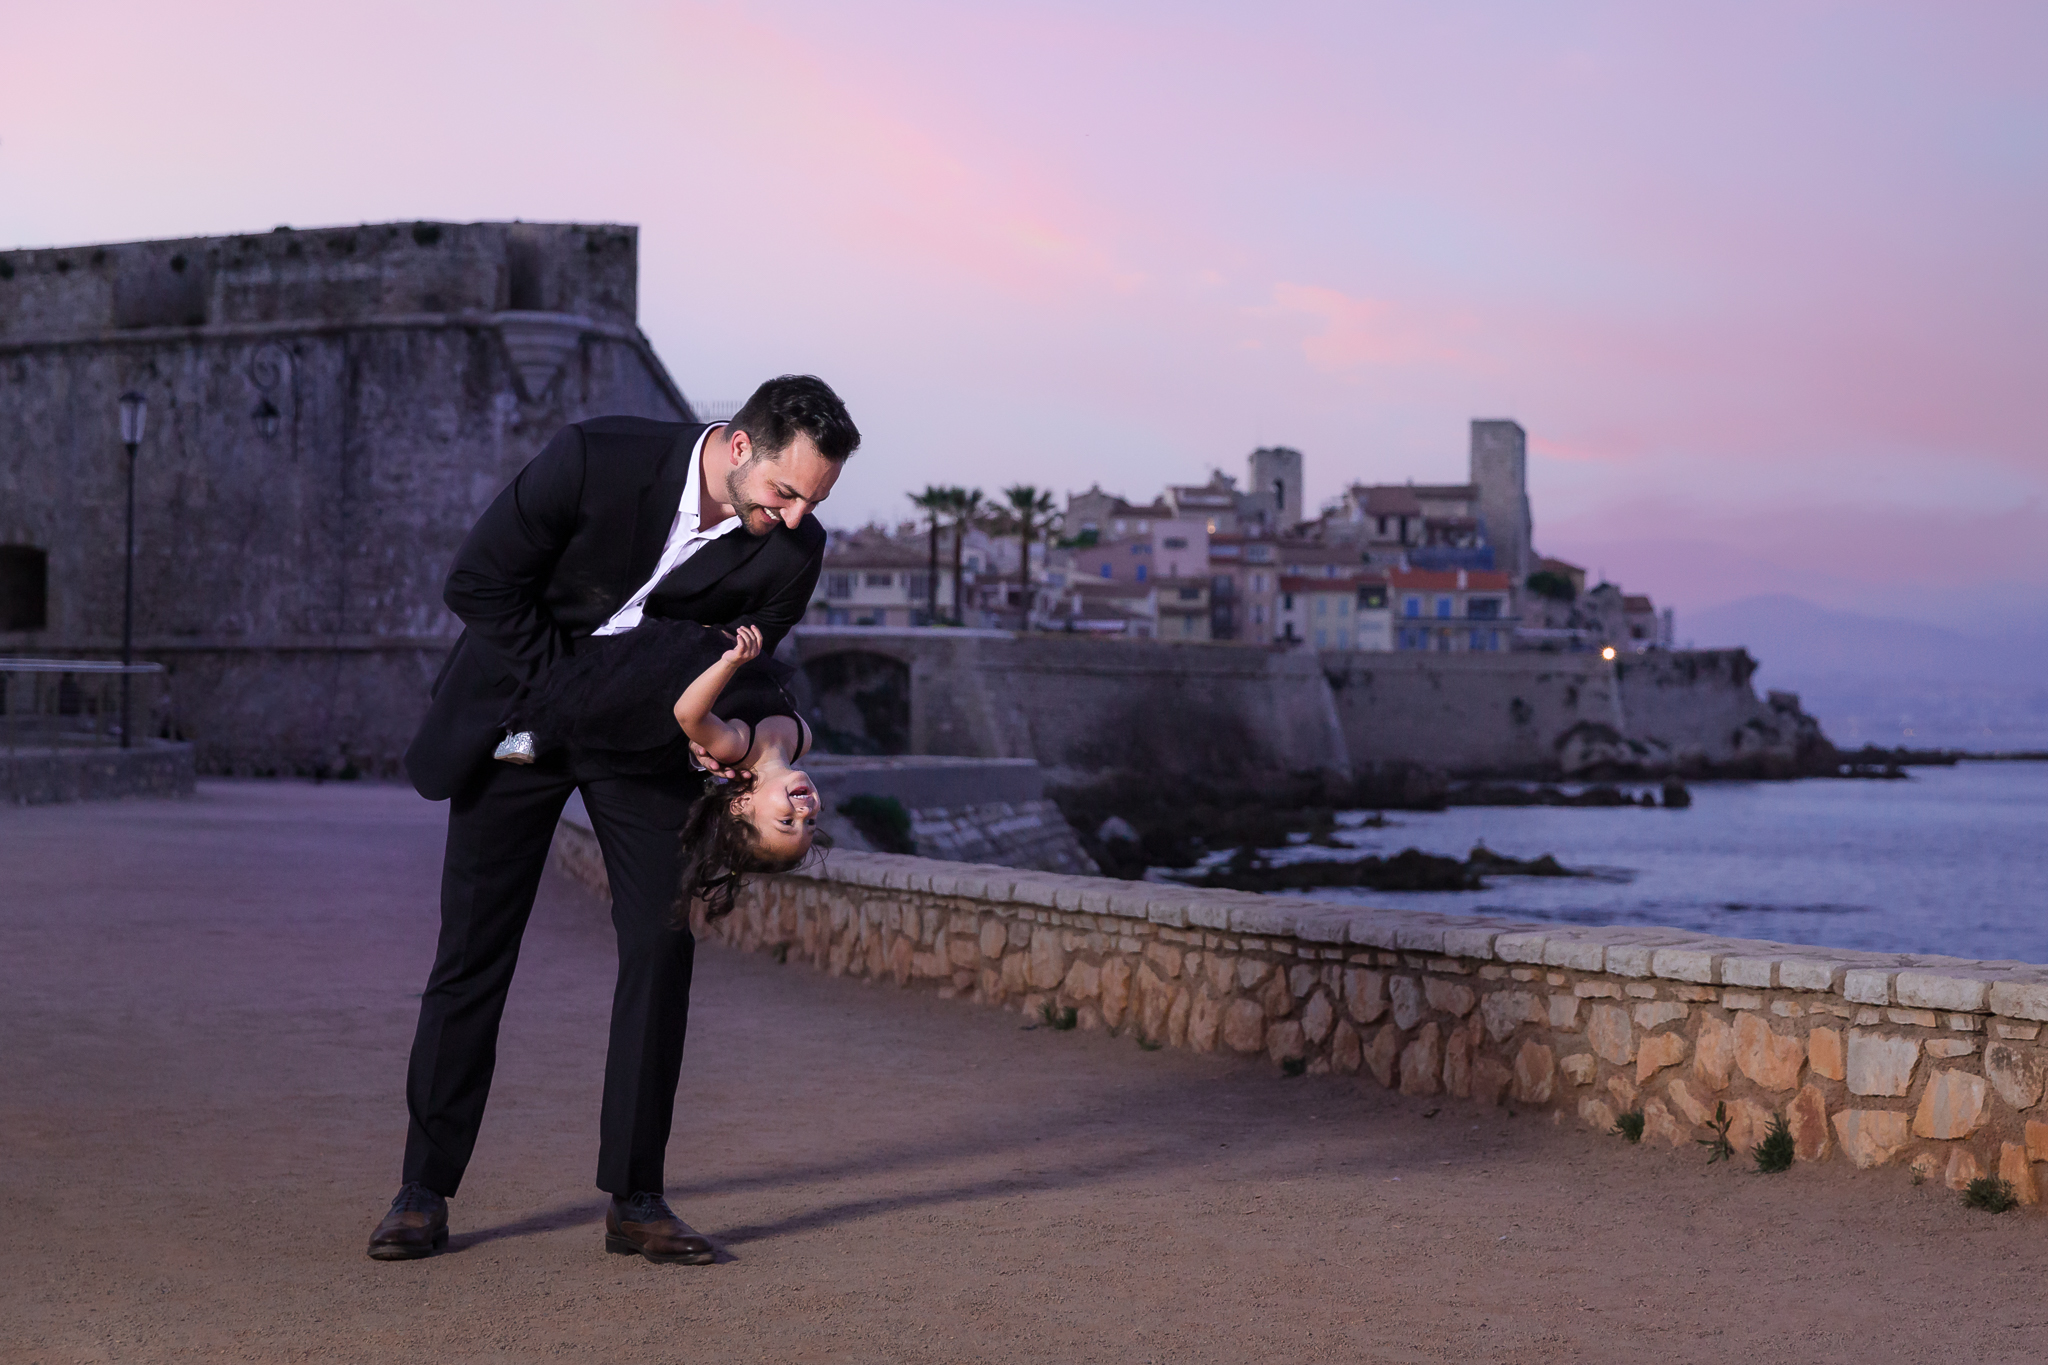 Dad dipping daughter while laughing during family session in Antibes France at sunset